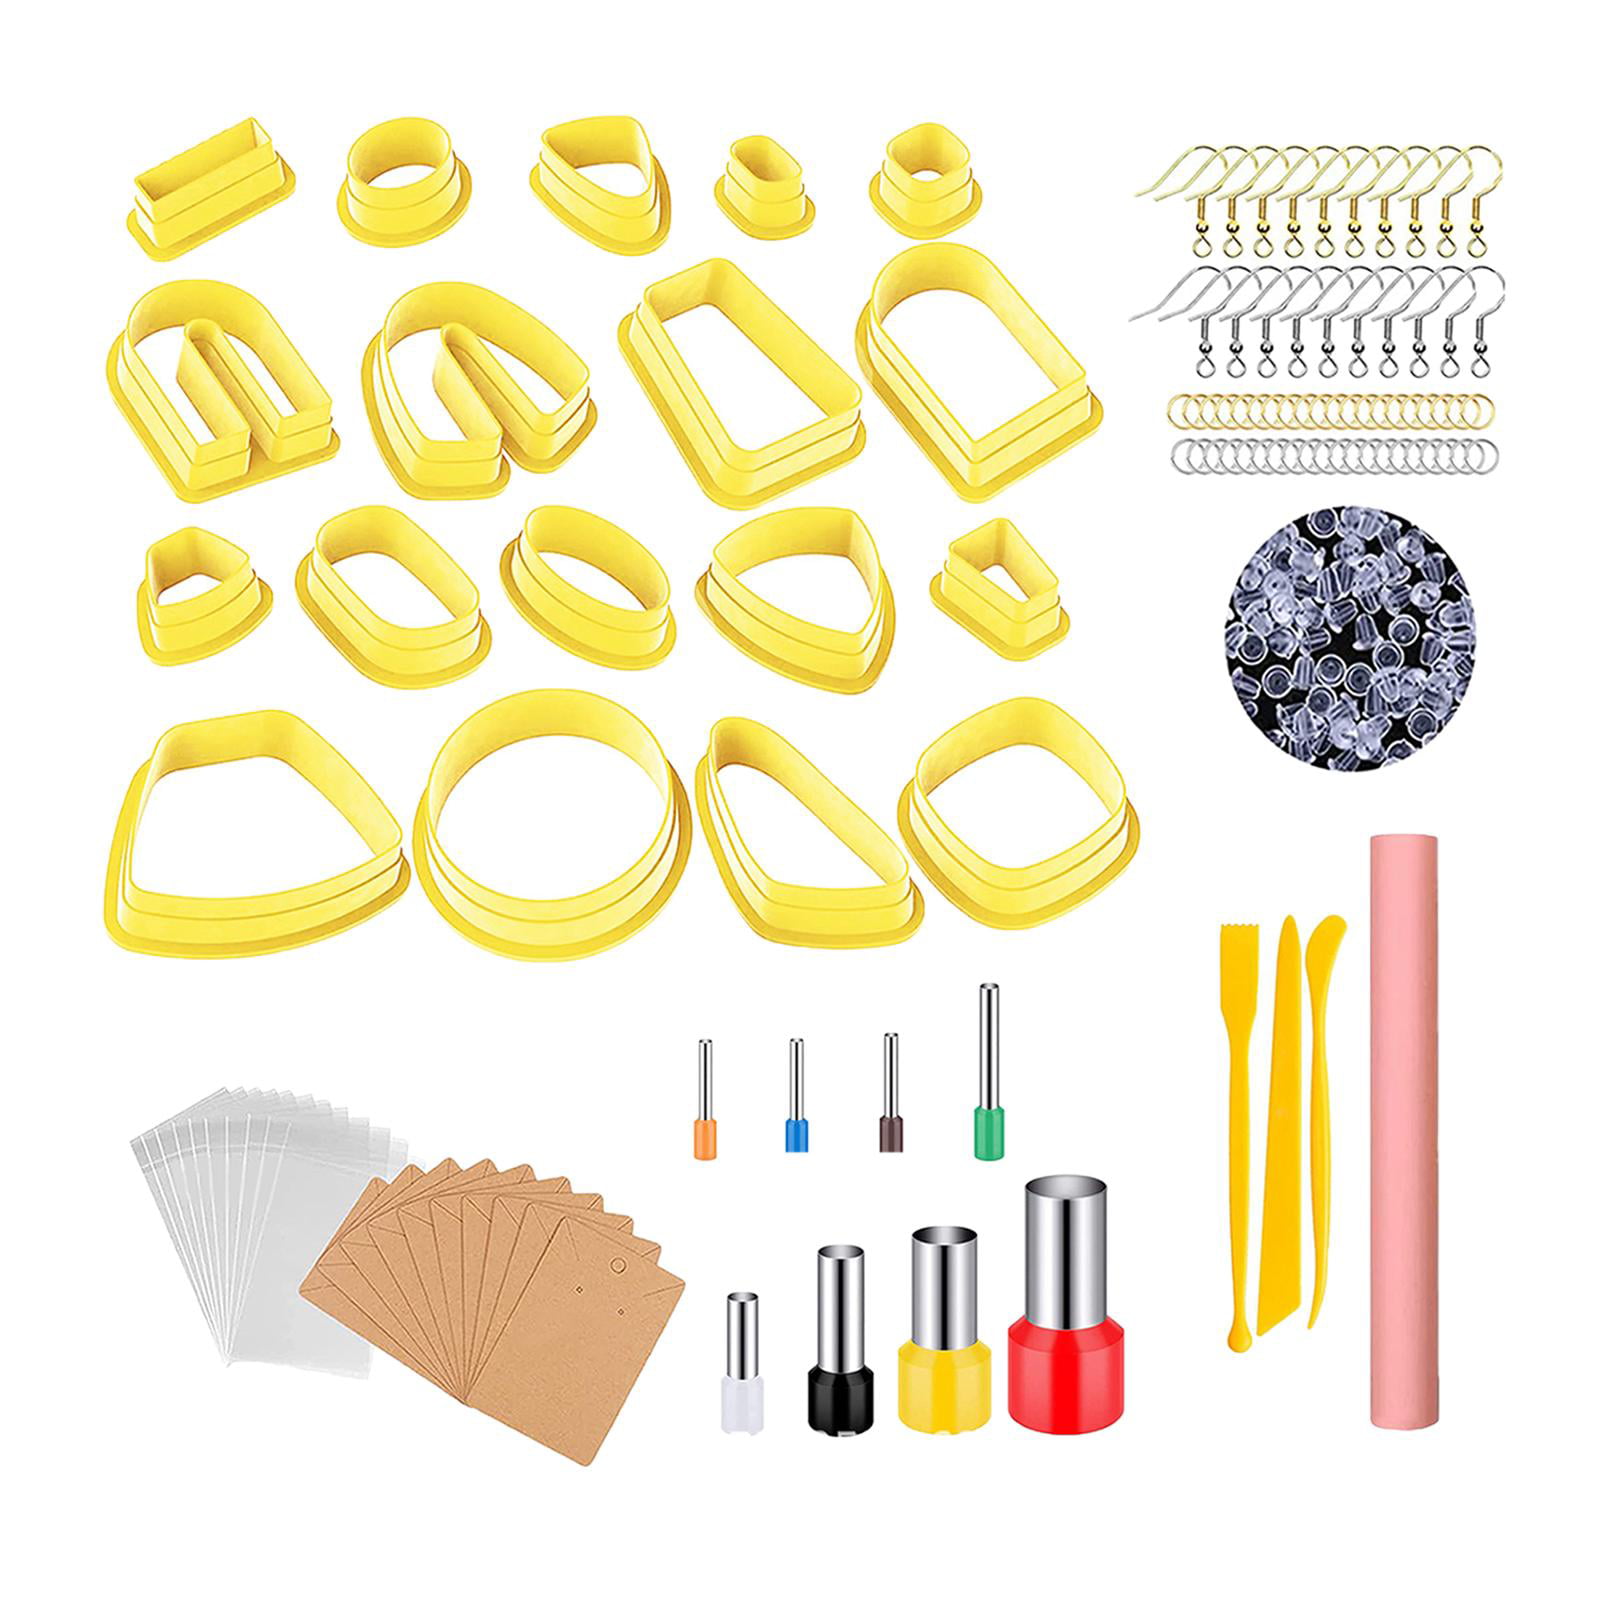 132Pcs Polymer Clay Cutters, 27Pcs Shapes Clay Earring Cutters with Earring  Cards, Earring Hooks Polymer Clay Jewelry Making Jump Rings Shape  Decorating Mold DIY Tools